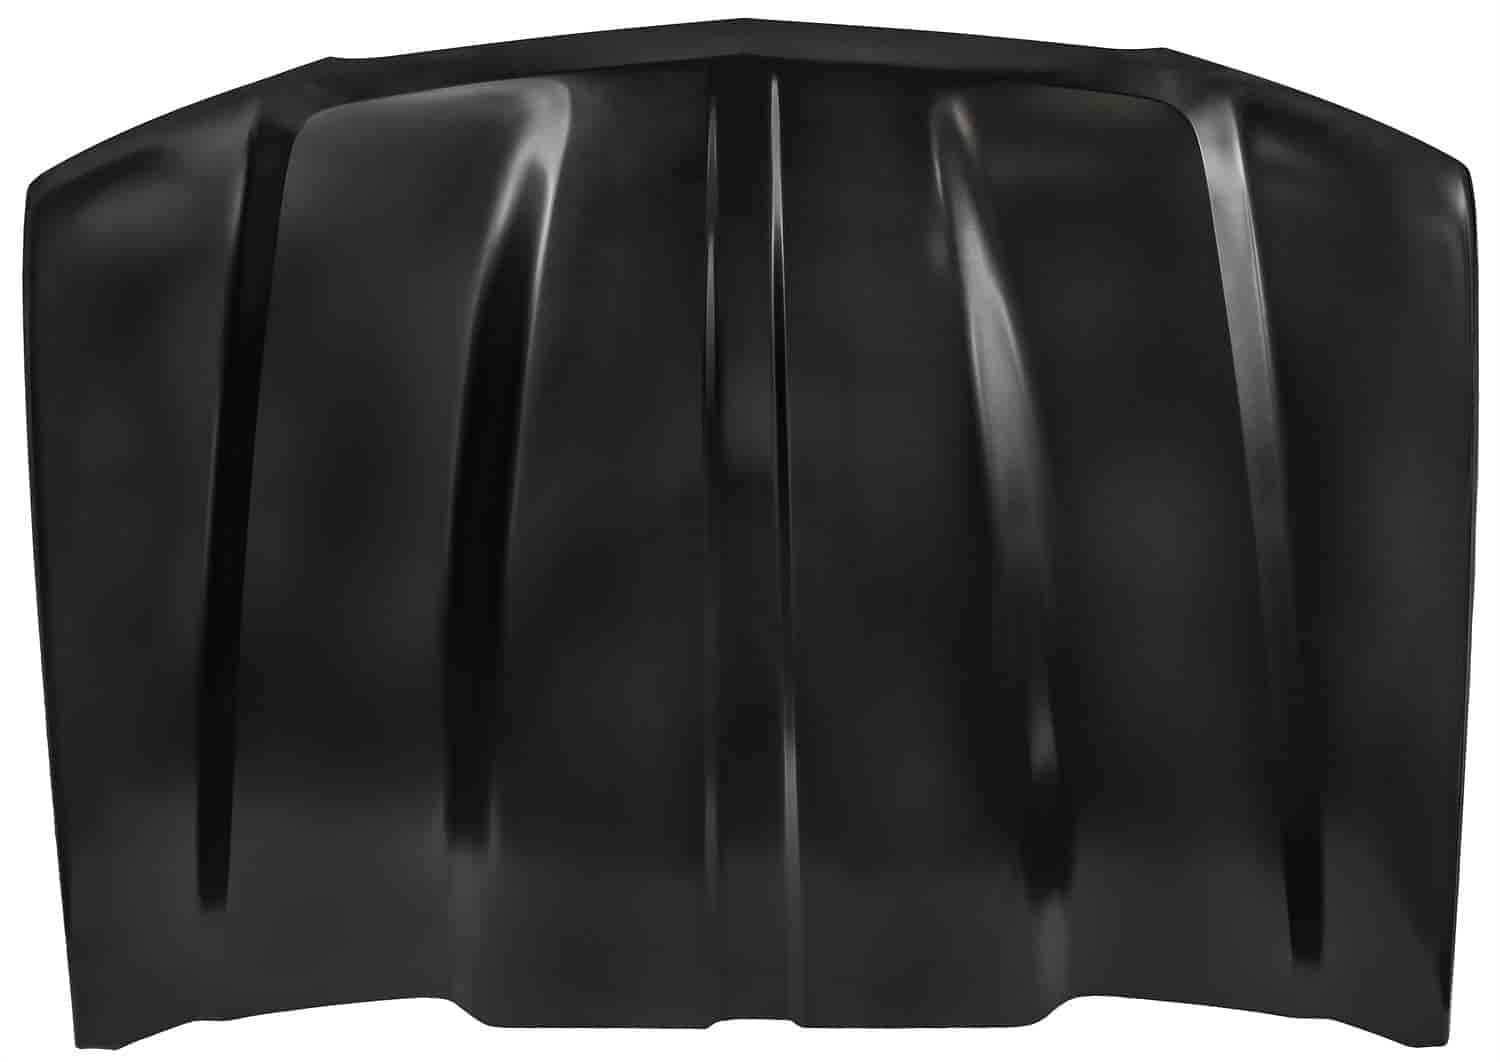 JEGS 555-78716 Cowl Hood - Cowl Induction Hood for 2003-2005 Chevy  Silverado 1500/2500 Pickup Truck, 2002-2006 Chevy Avalanche 1500/2500  [Steel] - JEGS - JEGS